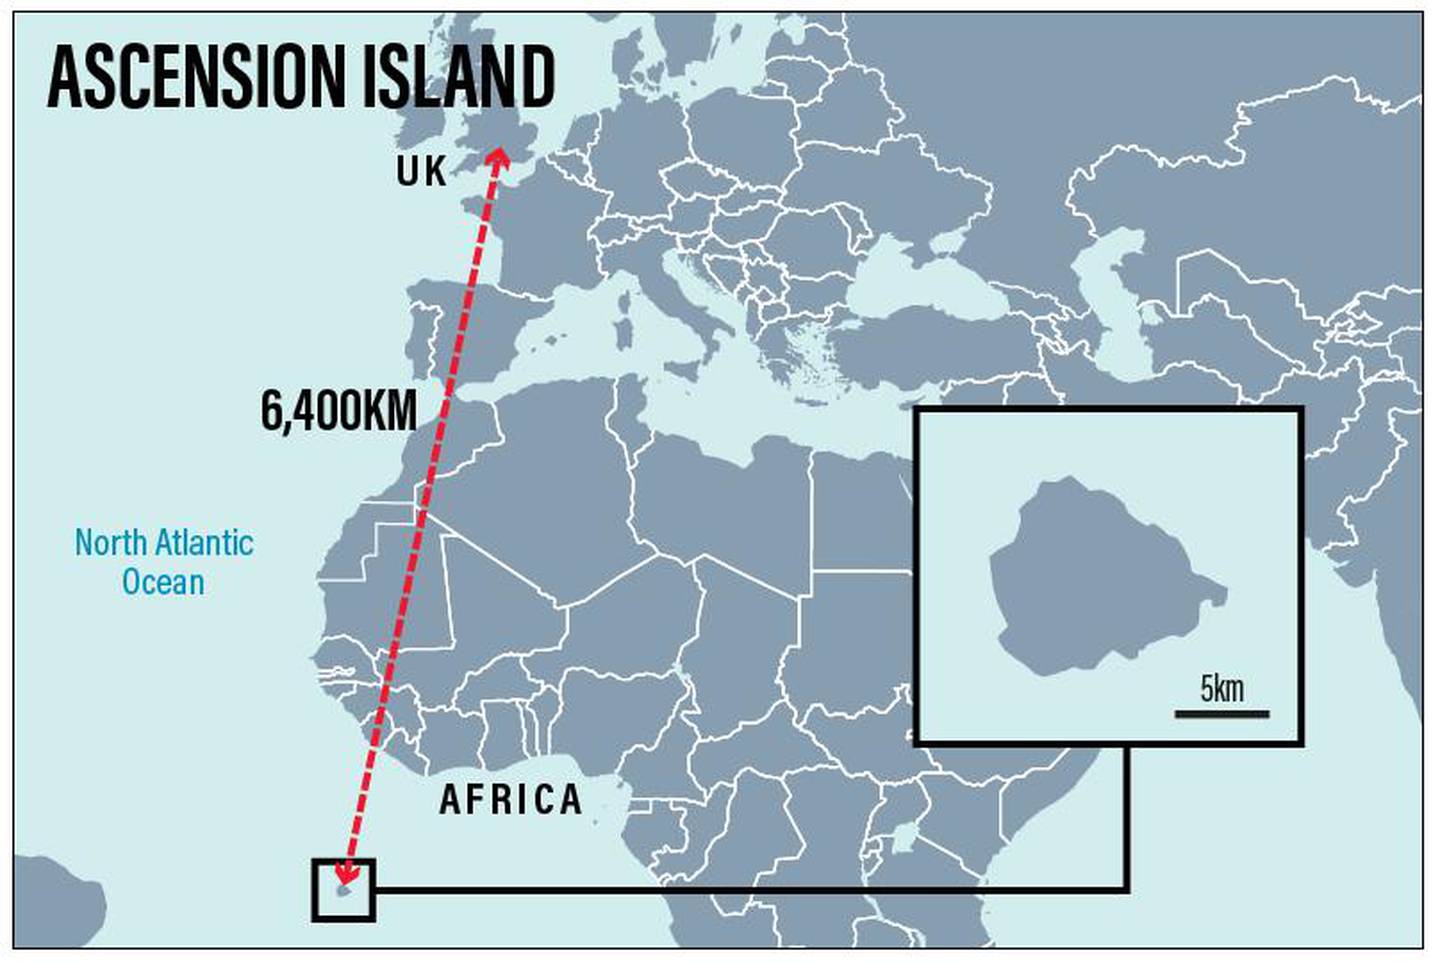 A map showing the UK and Ascension Island. The National 